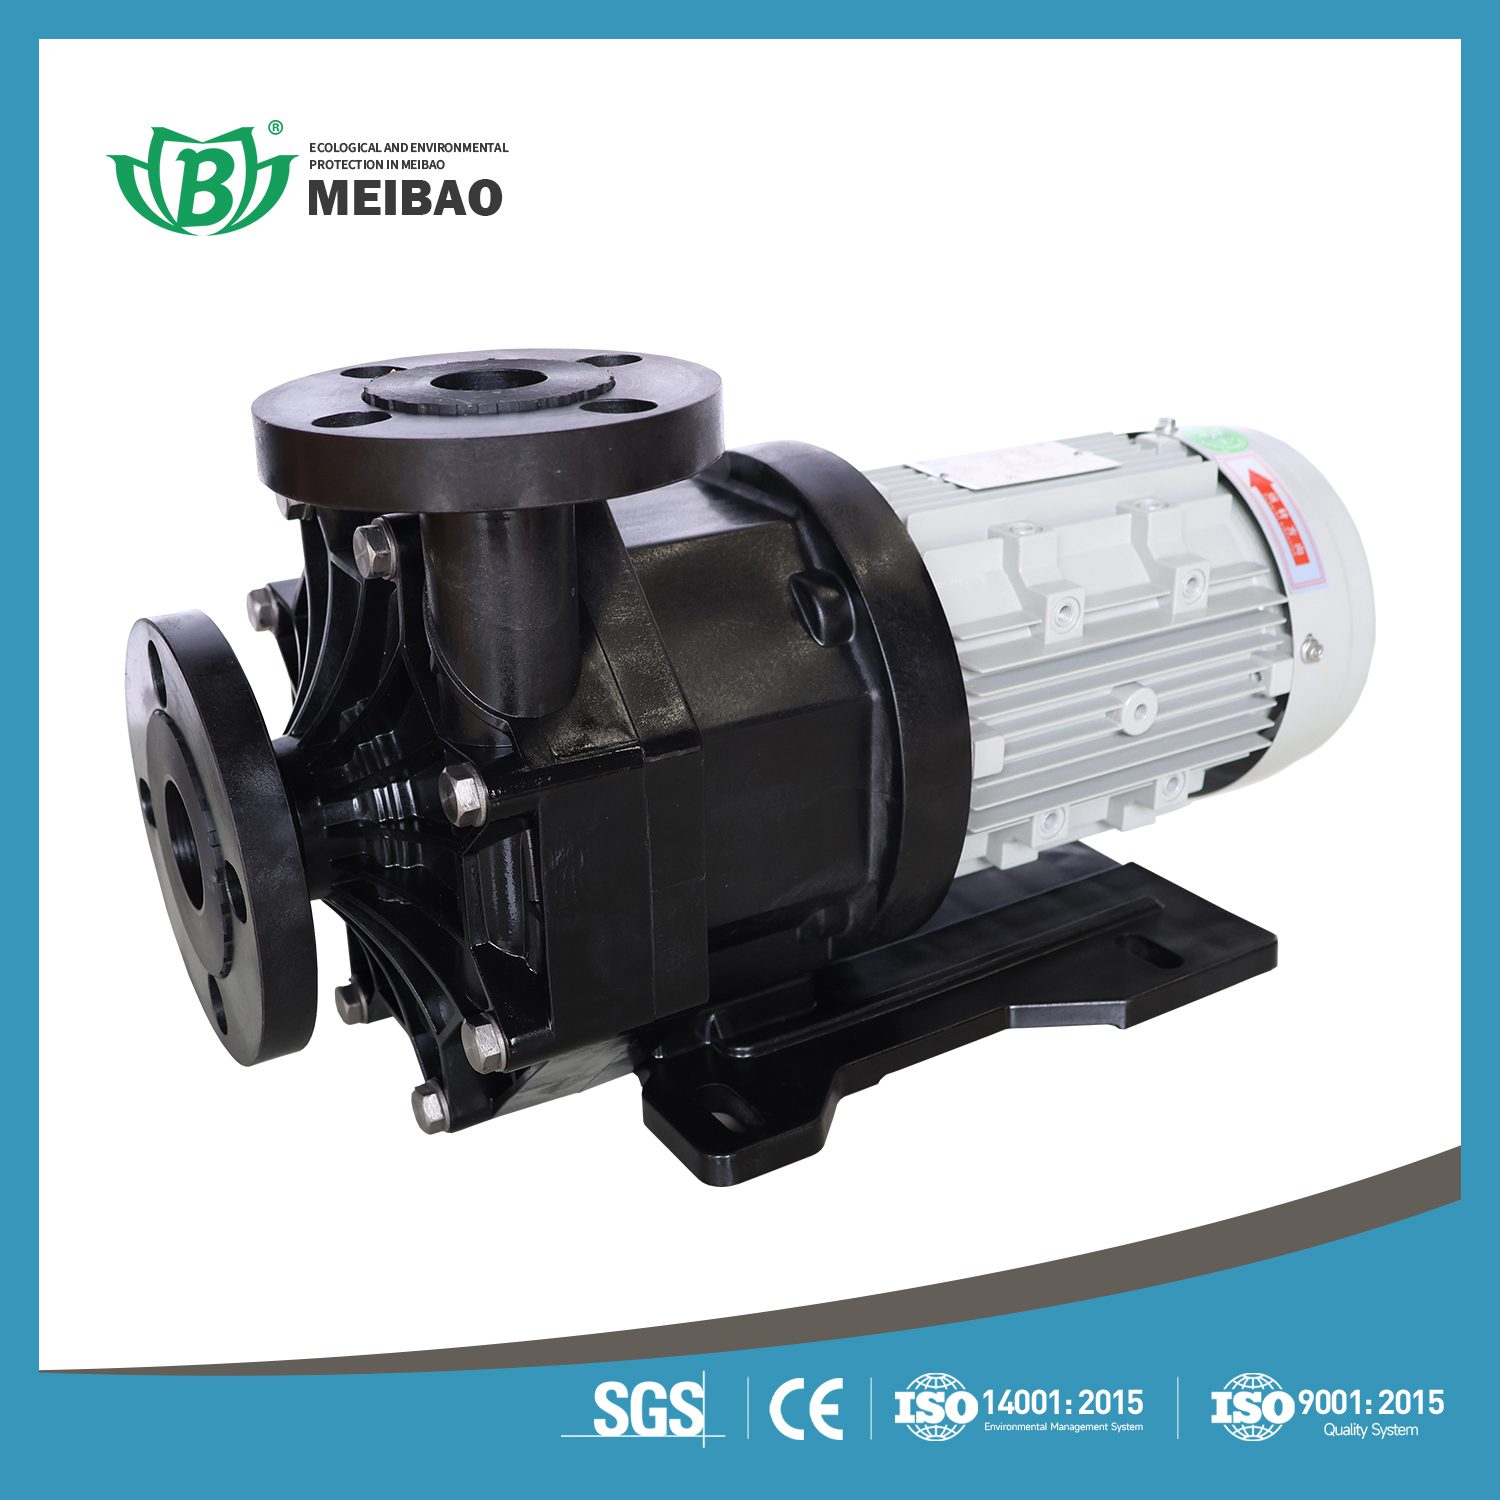 How to select a circulation pump?